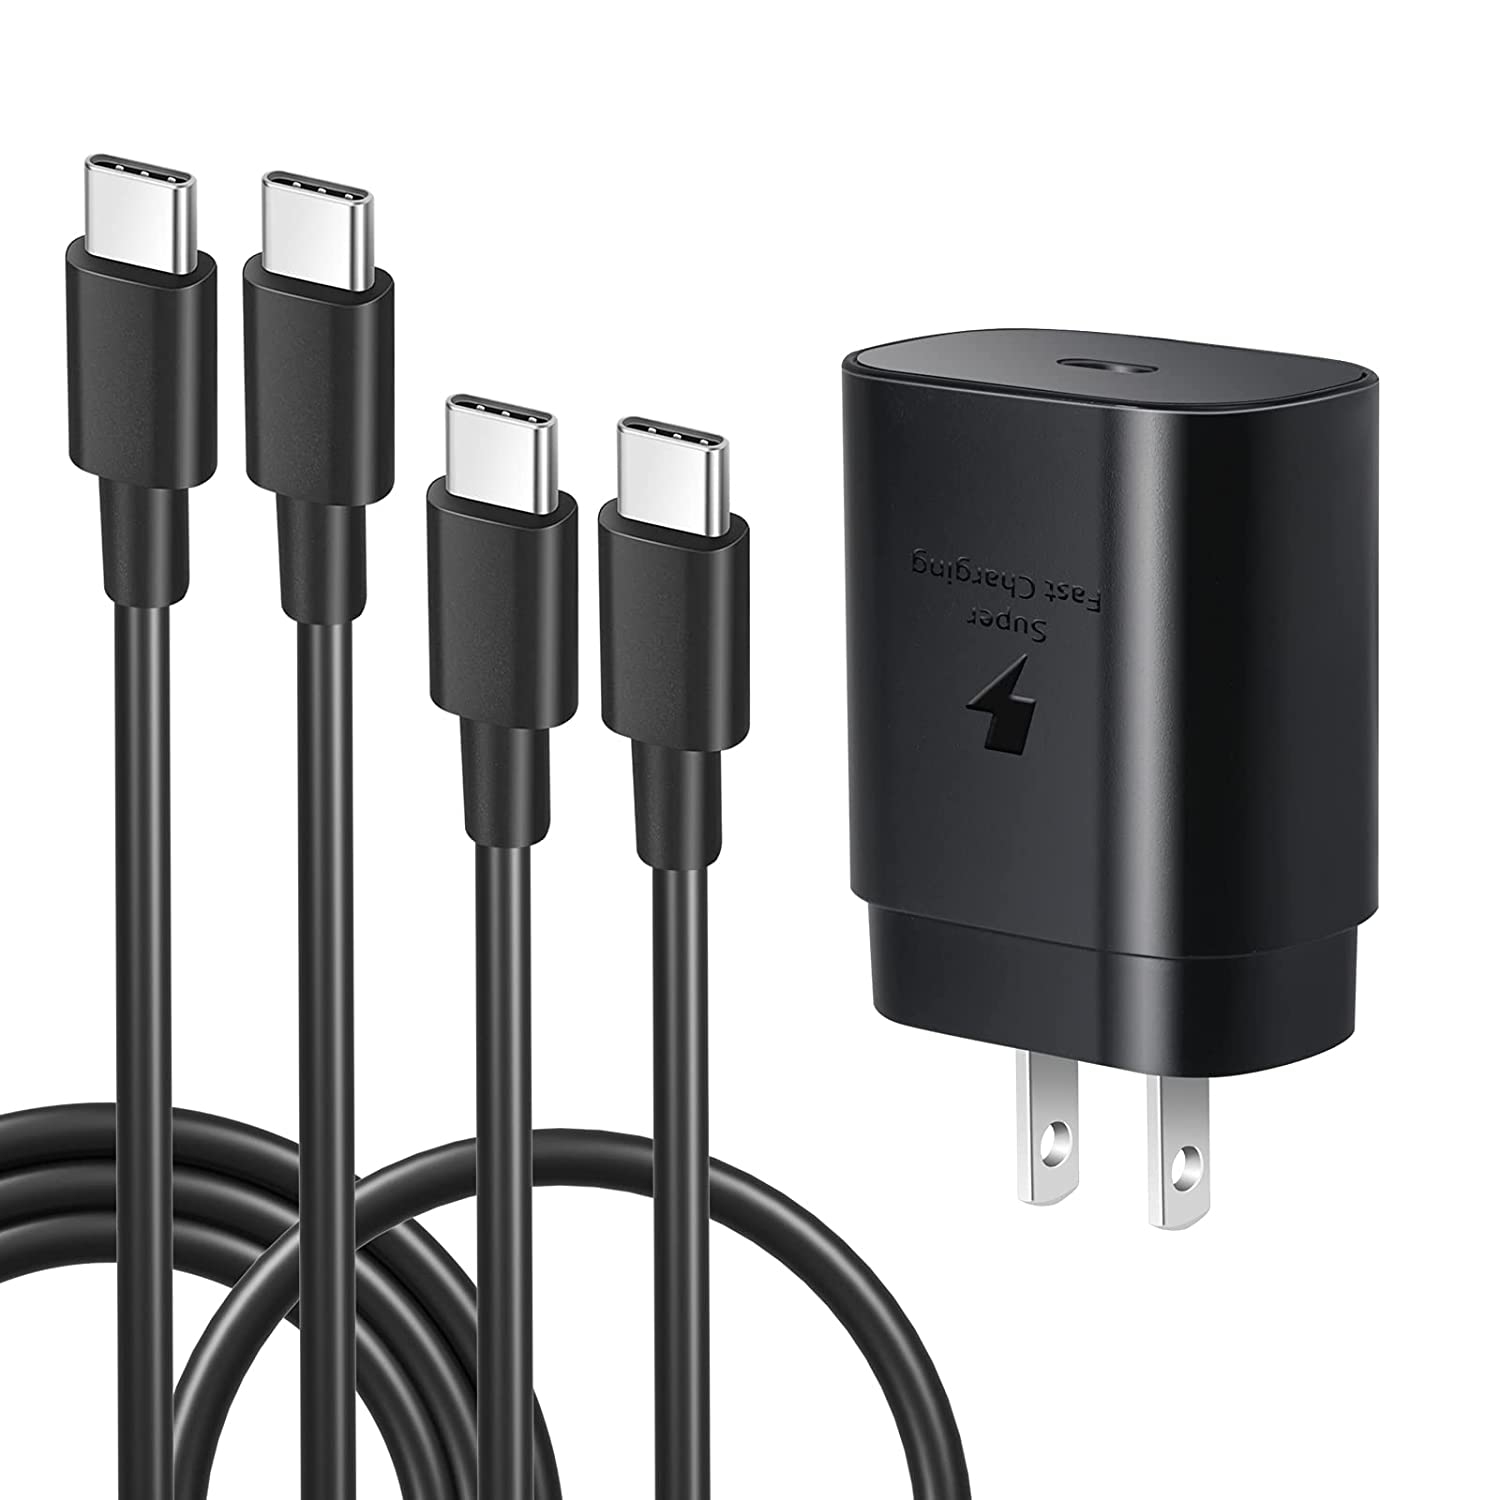 Super Fast Type C Charger Kit 25W USB C Charger with 2 Type C to C Cable (6.6ft+1.5ft) Compatible with Samsung Galaxy S21/20 Ultra 5G, Note 10+/20,A80/A70,Pixel 4/3XL,Pad,Tablets and More